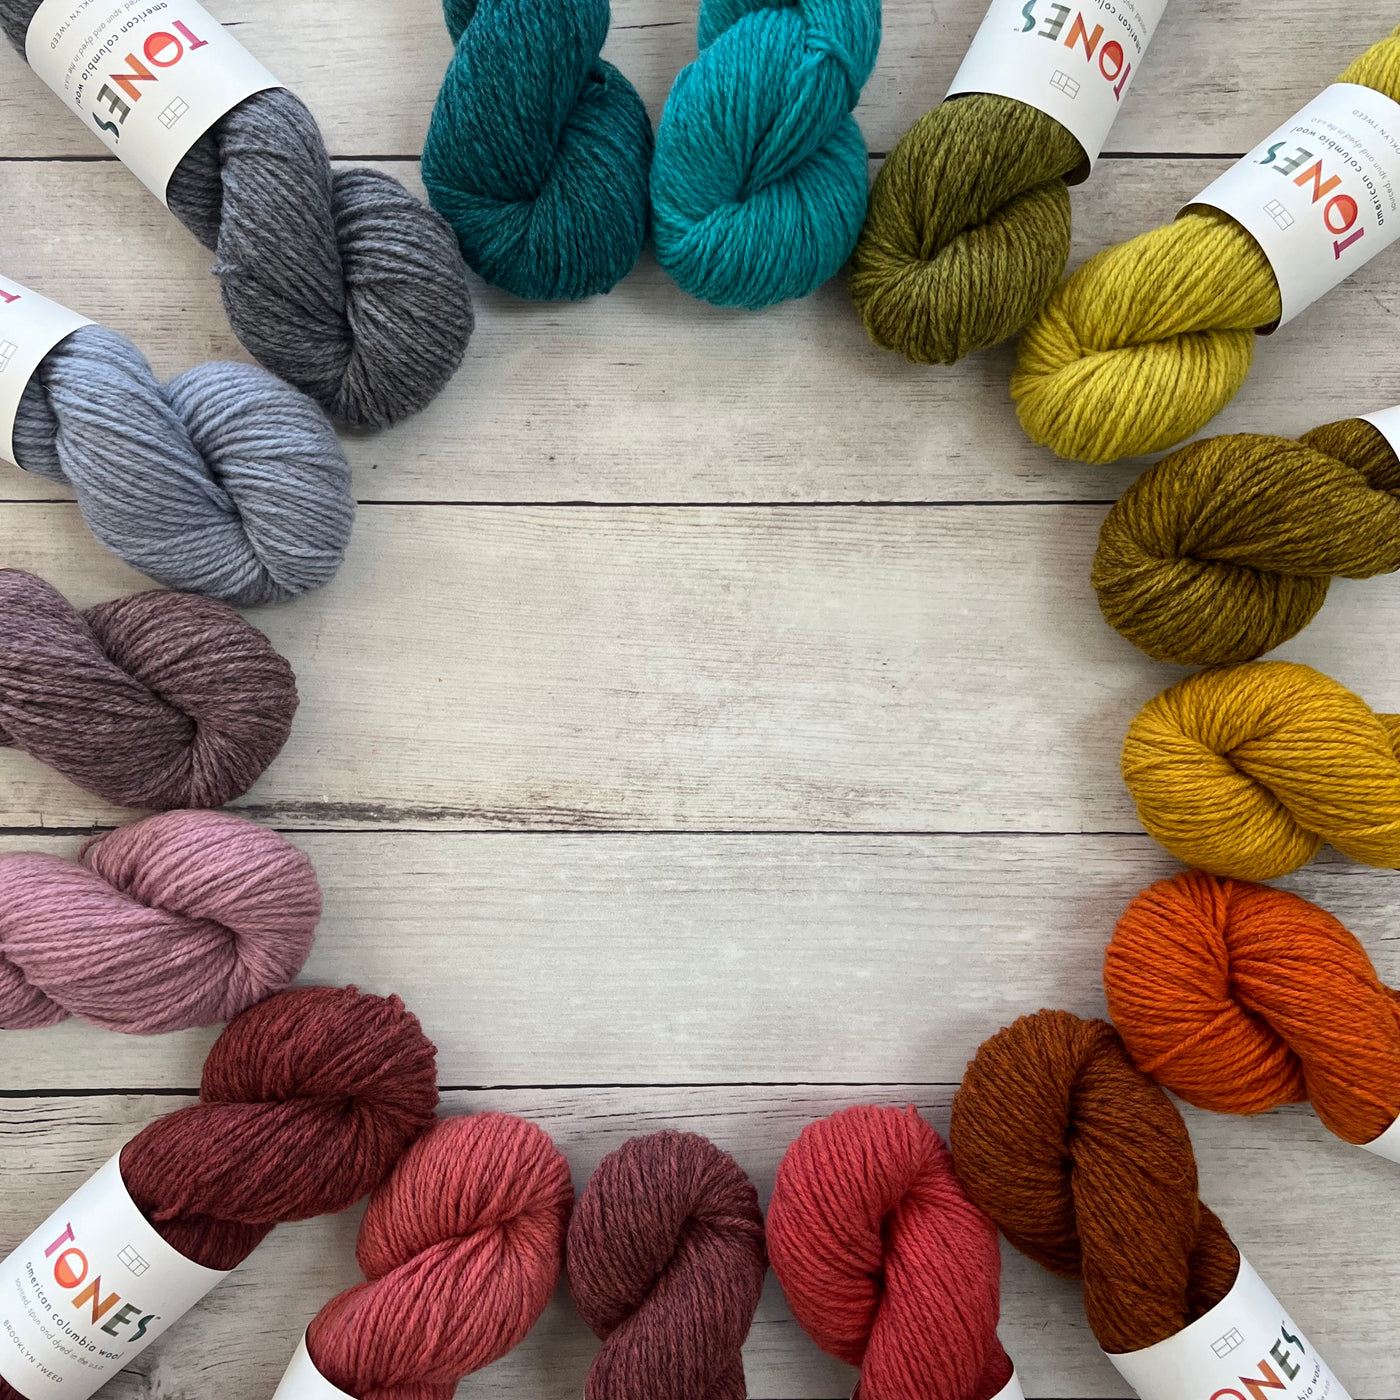 About Our Yarn